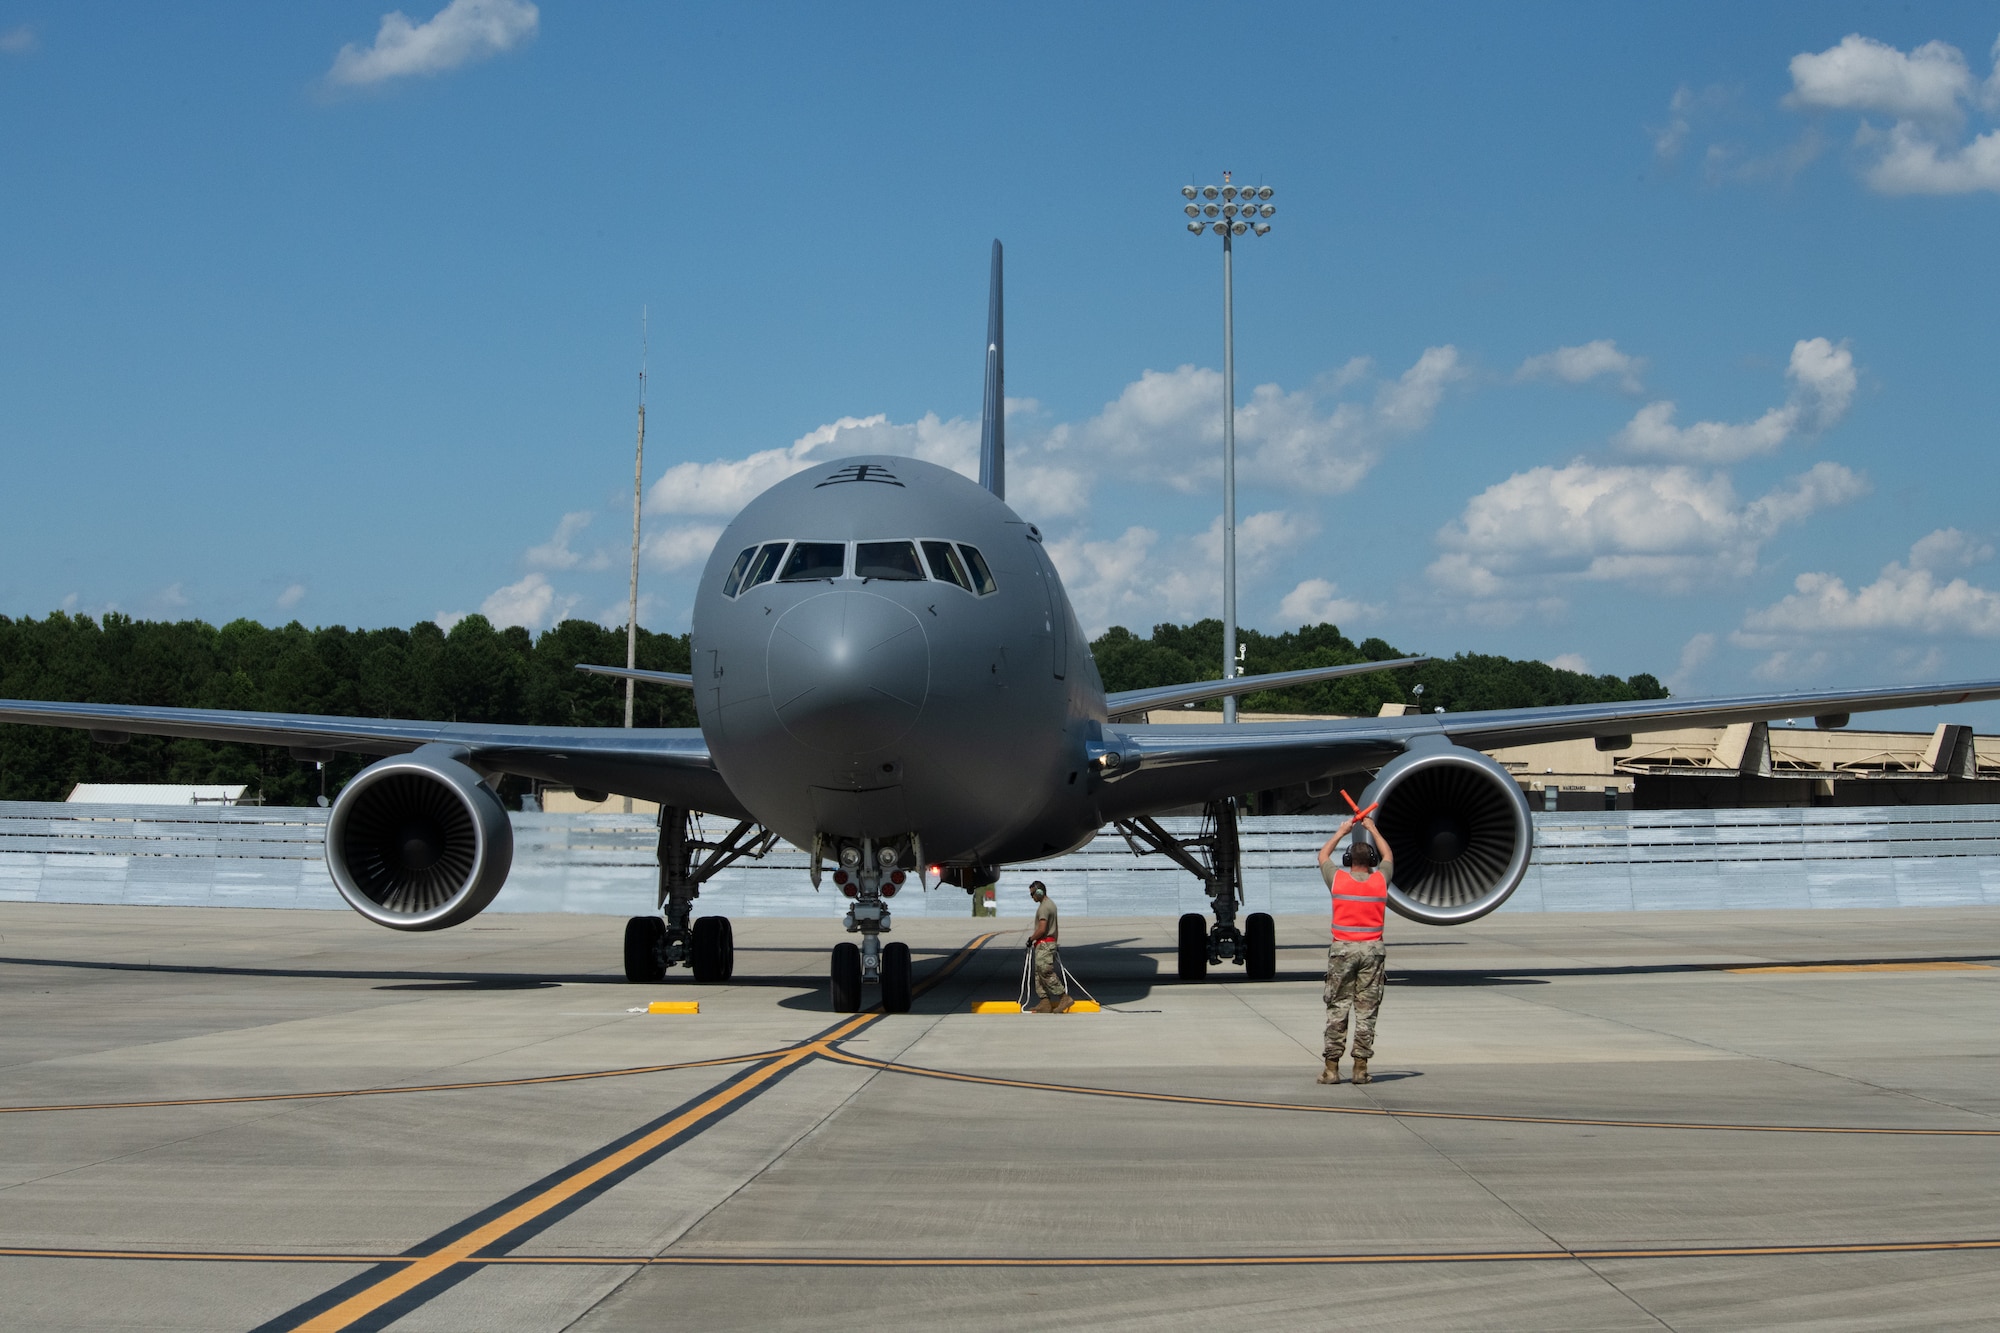 The 46th 46 arrives at 916ARW